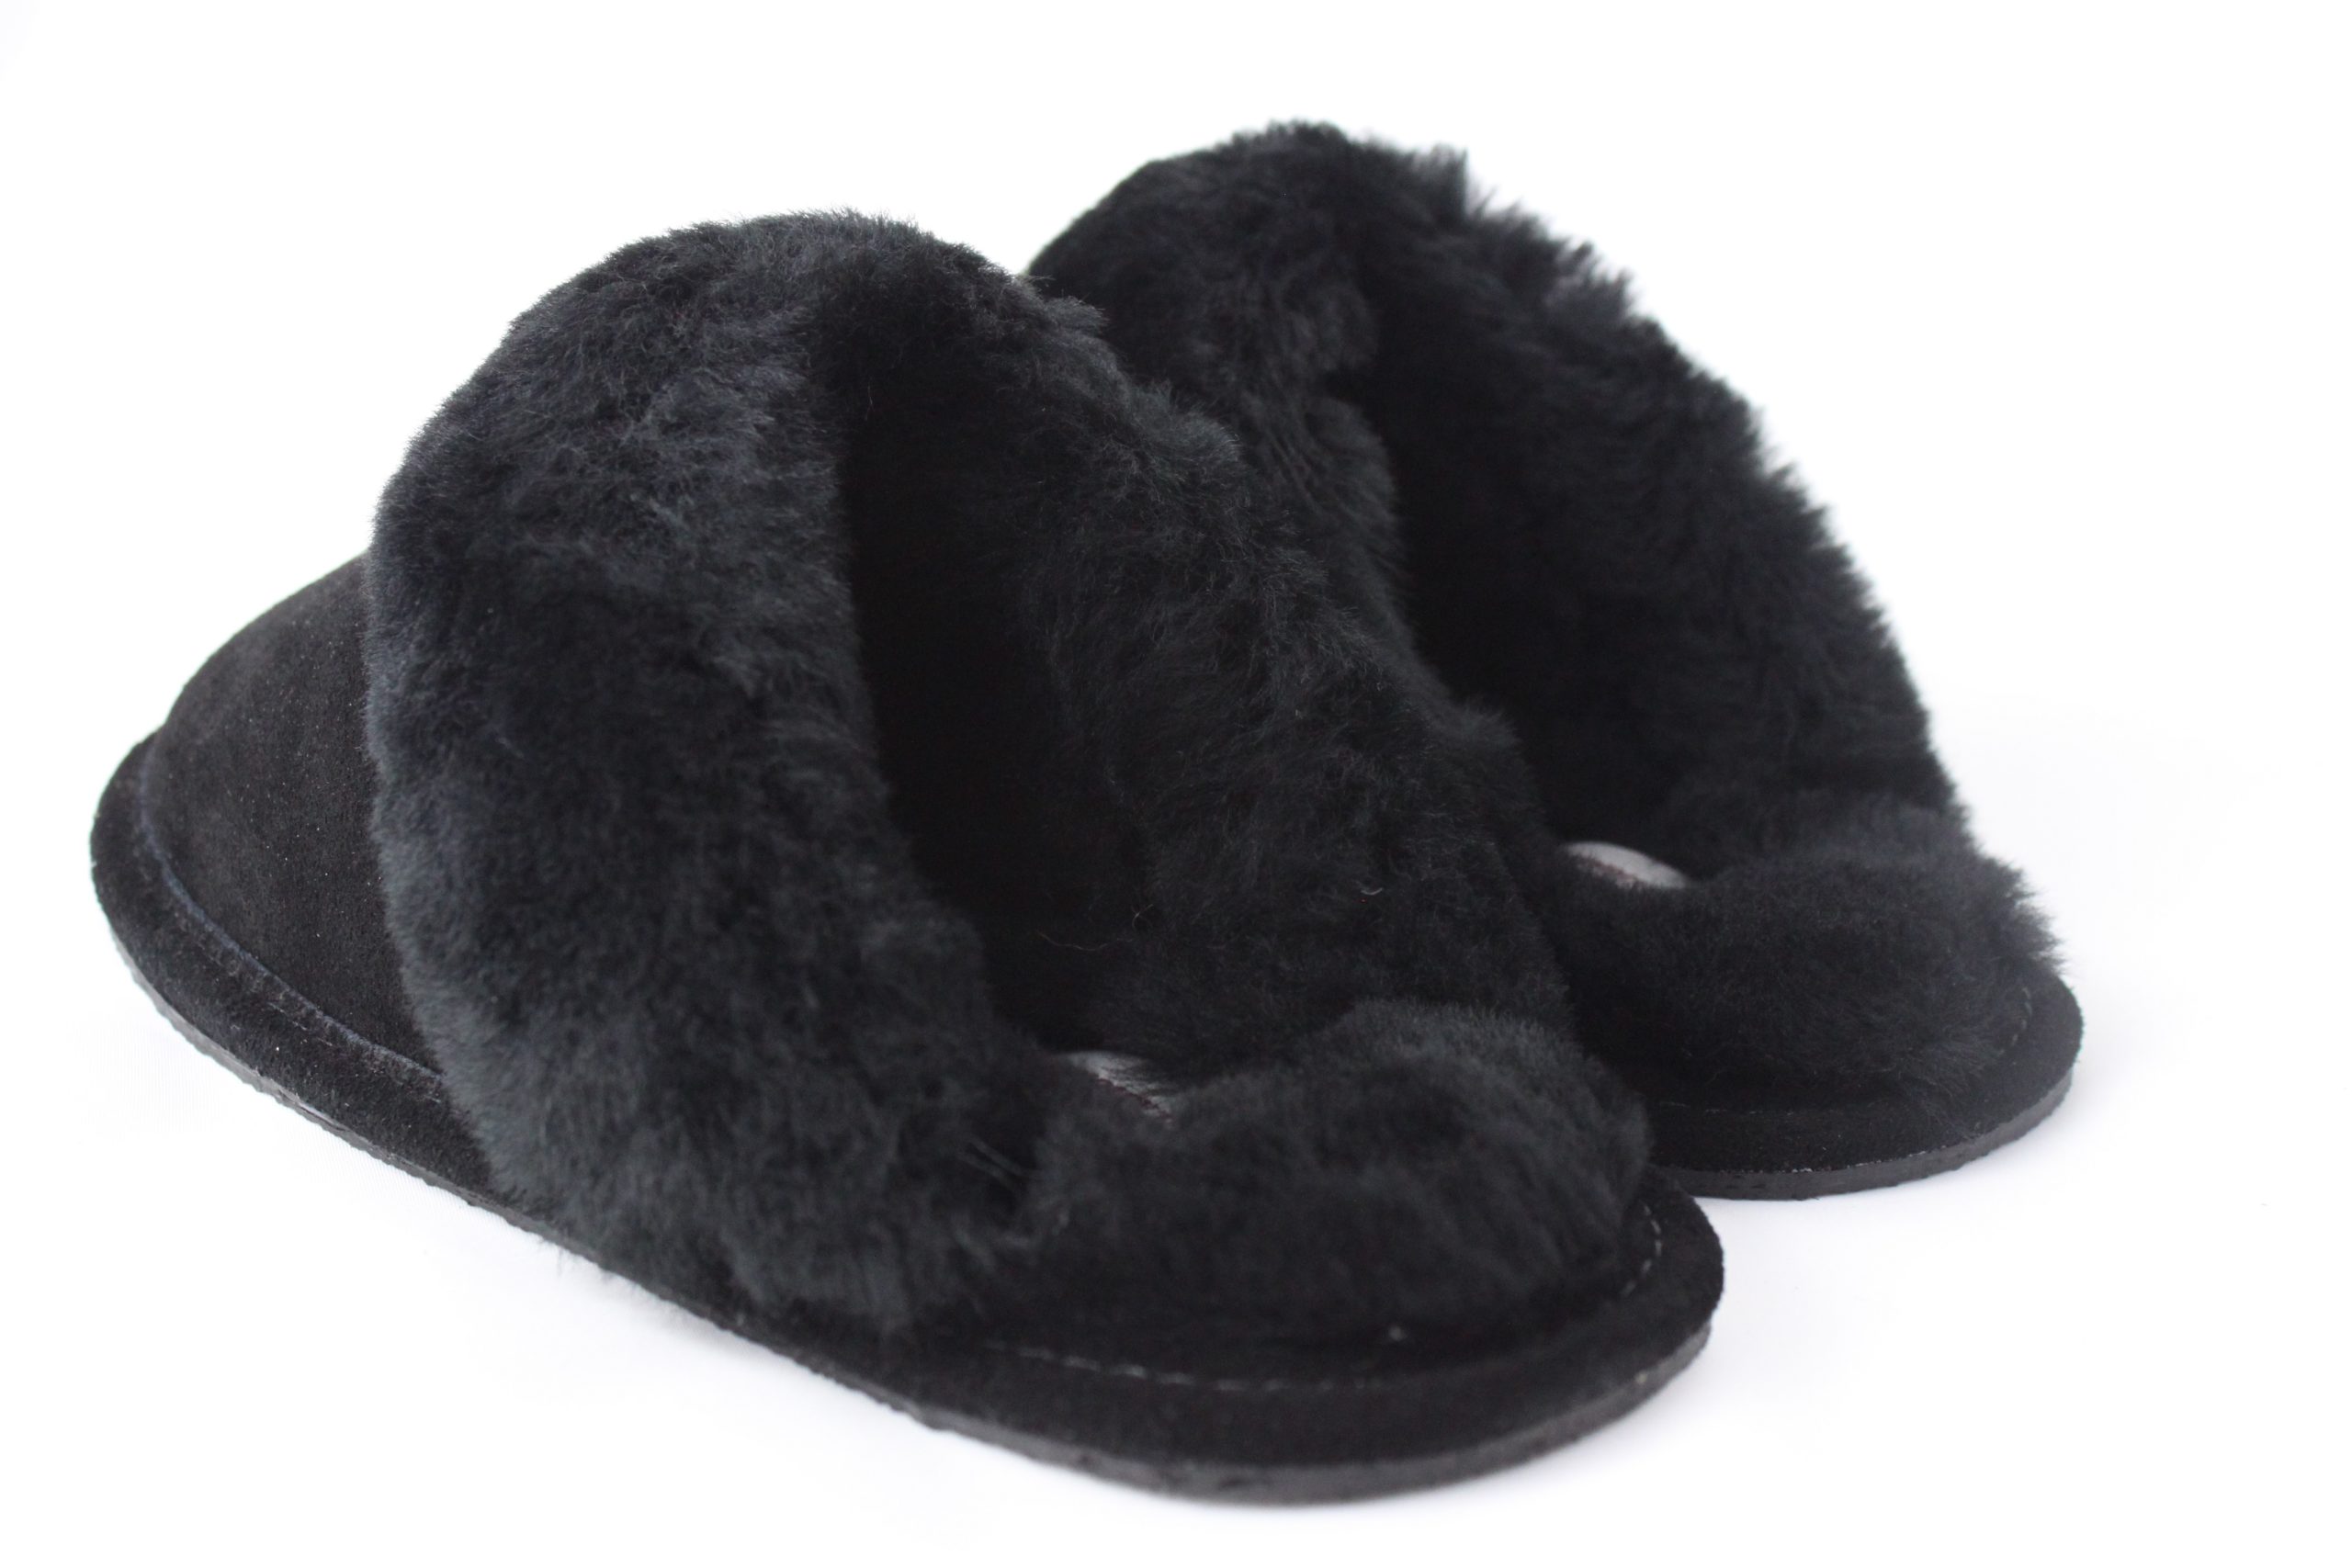 Ladies Slip on Style Sheepskin Slipper – Radford Leather Fashions-Quality Leather Sheepskin Jackets for Men and Women. Coventry, West Midlands, UK for over 40 years